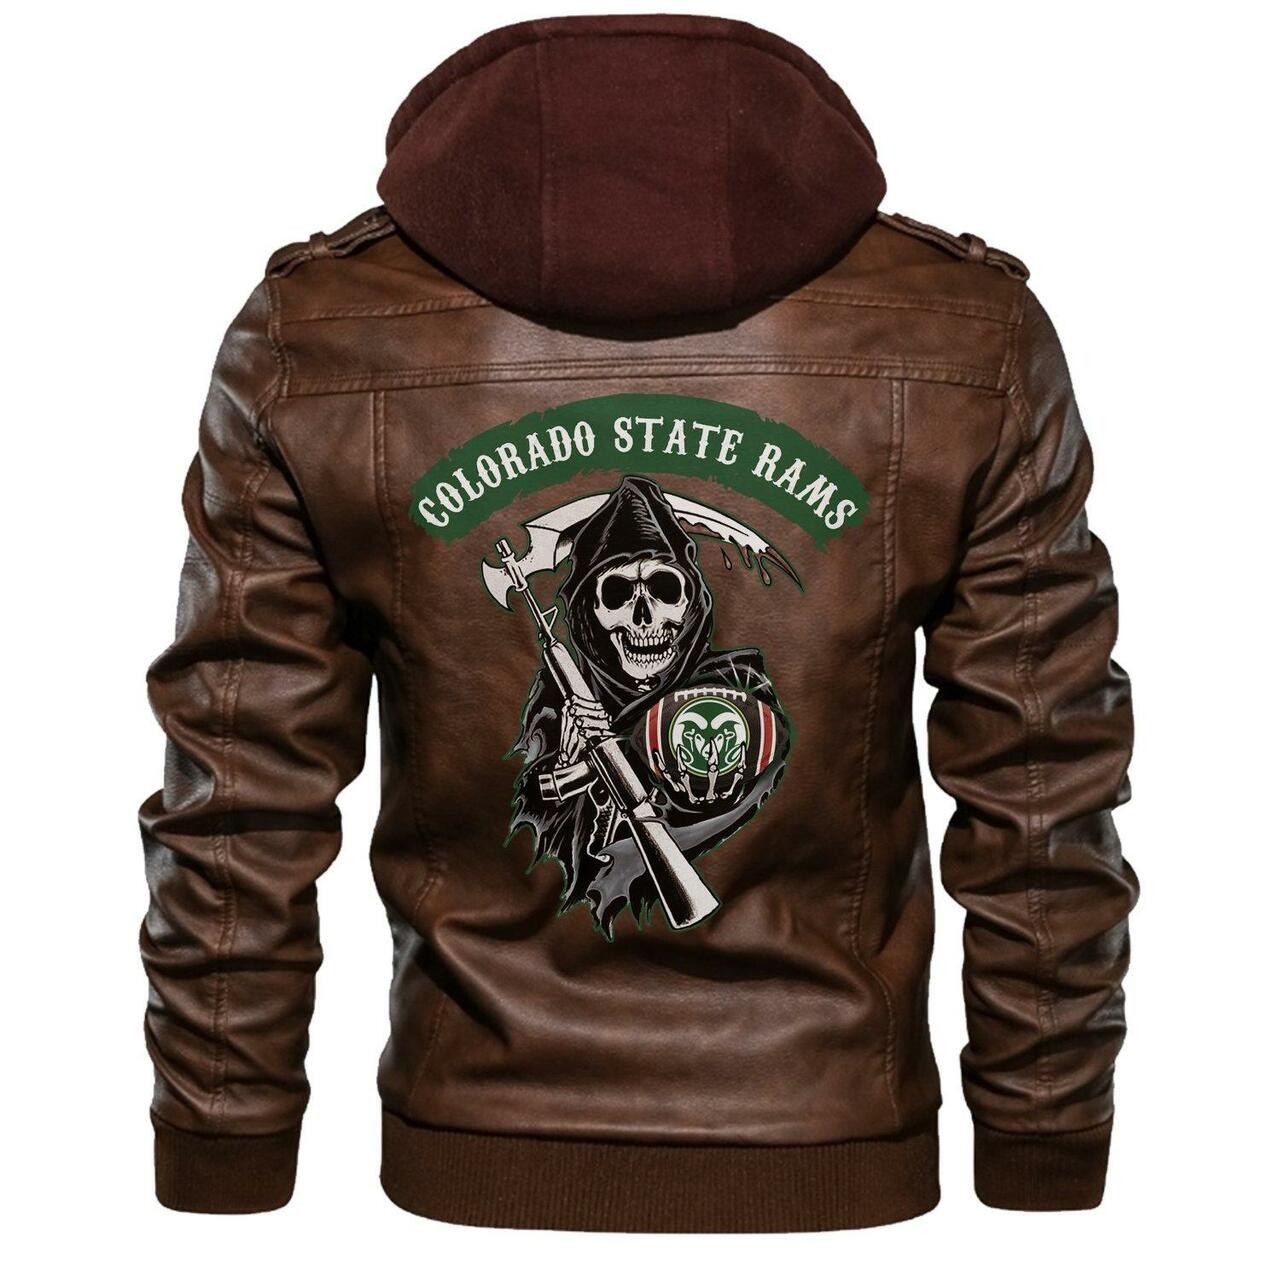 Our store has all of the latest leather jacket 132